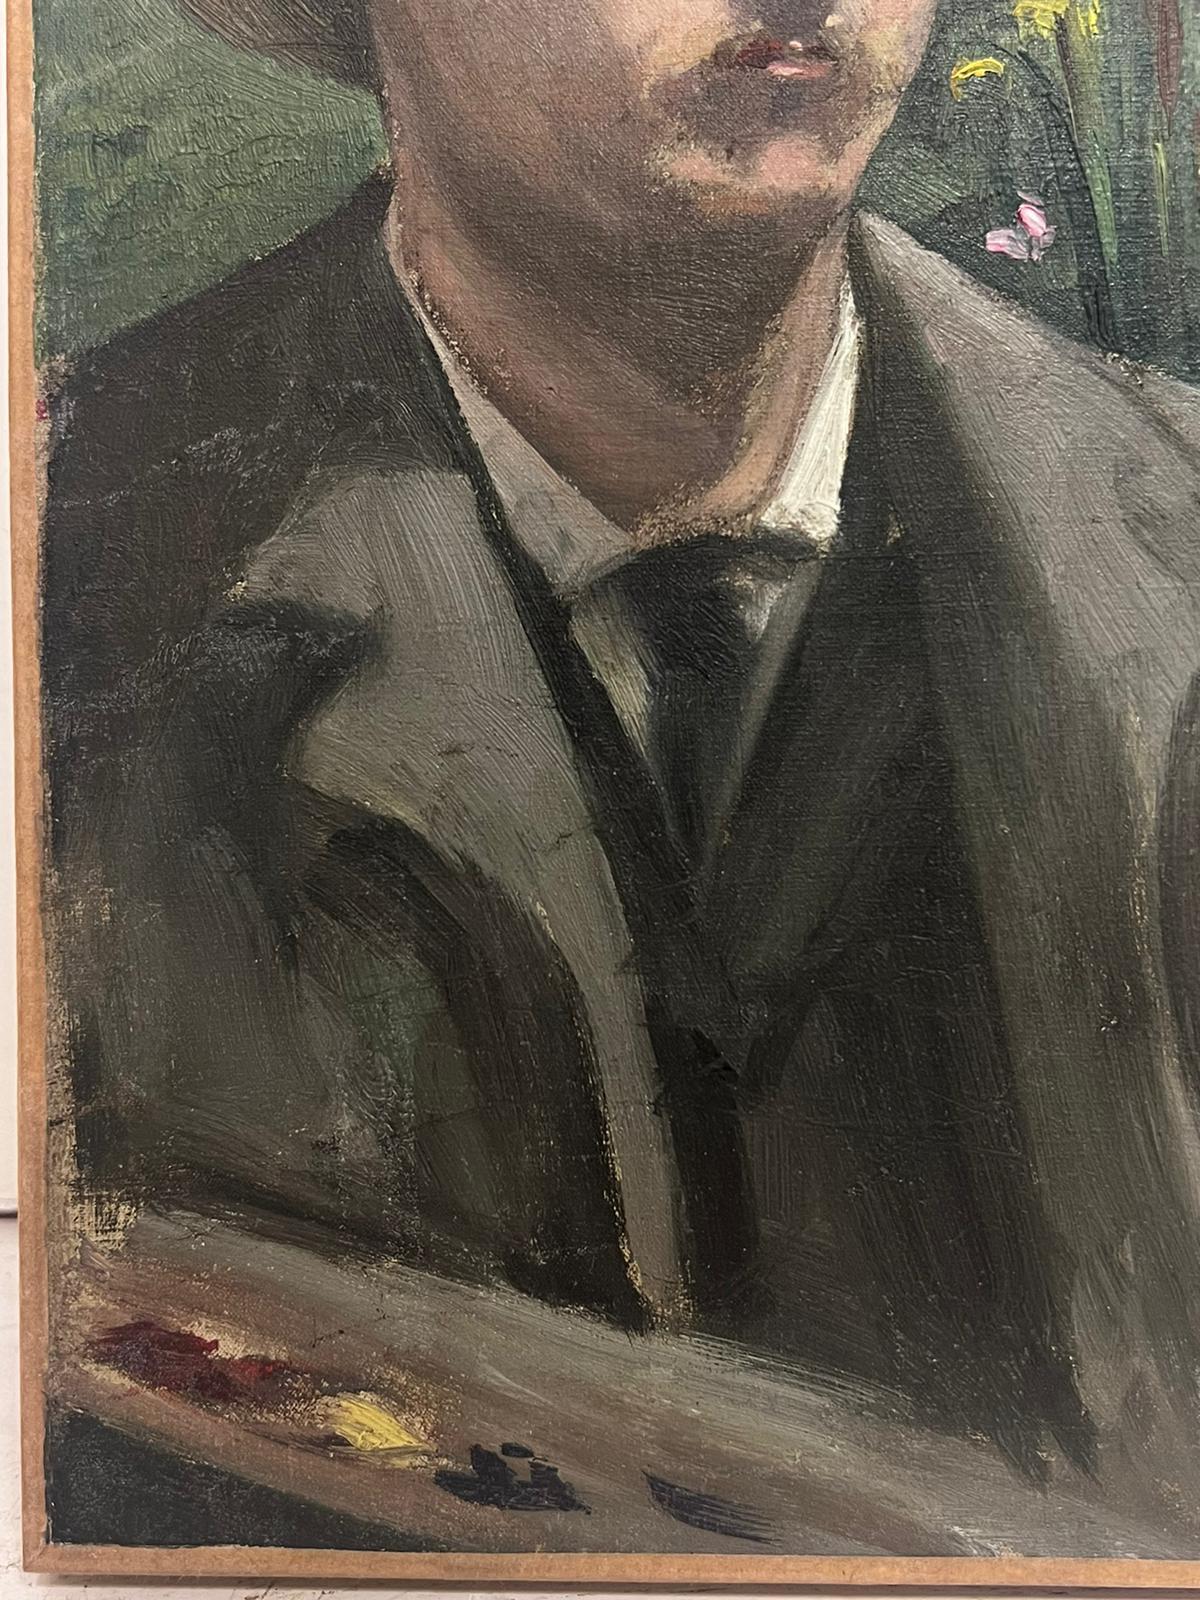 Self Portrait of the Artist
French Impressionist painter of the late 19th century
oil on canvas
canvas: 11 x 9 inches
provenance: private collection, France
condition: very good and sound condition